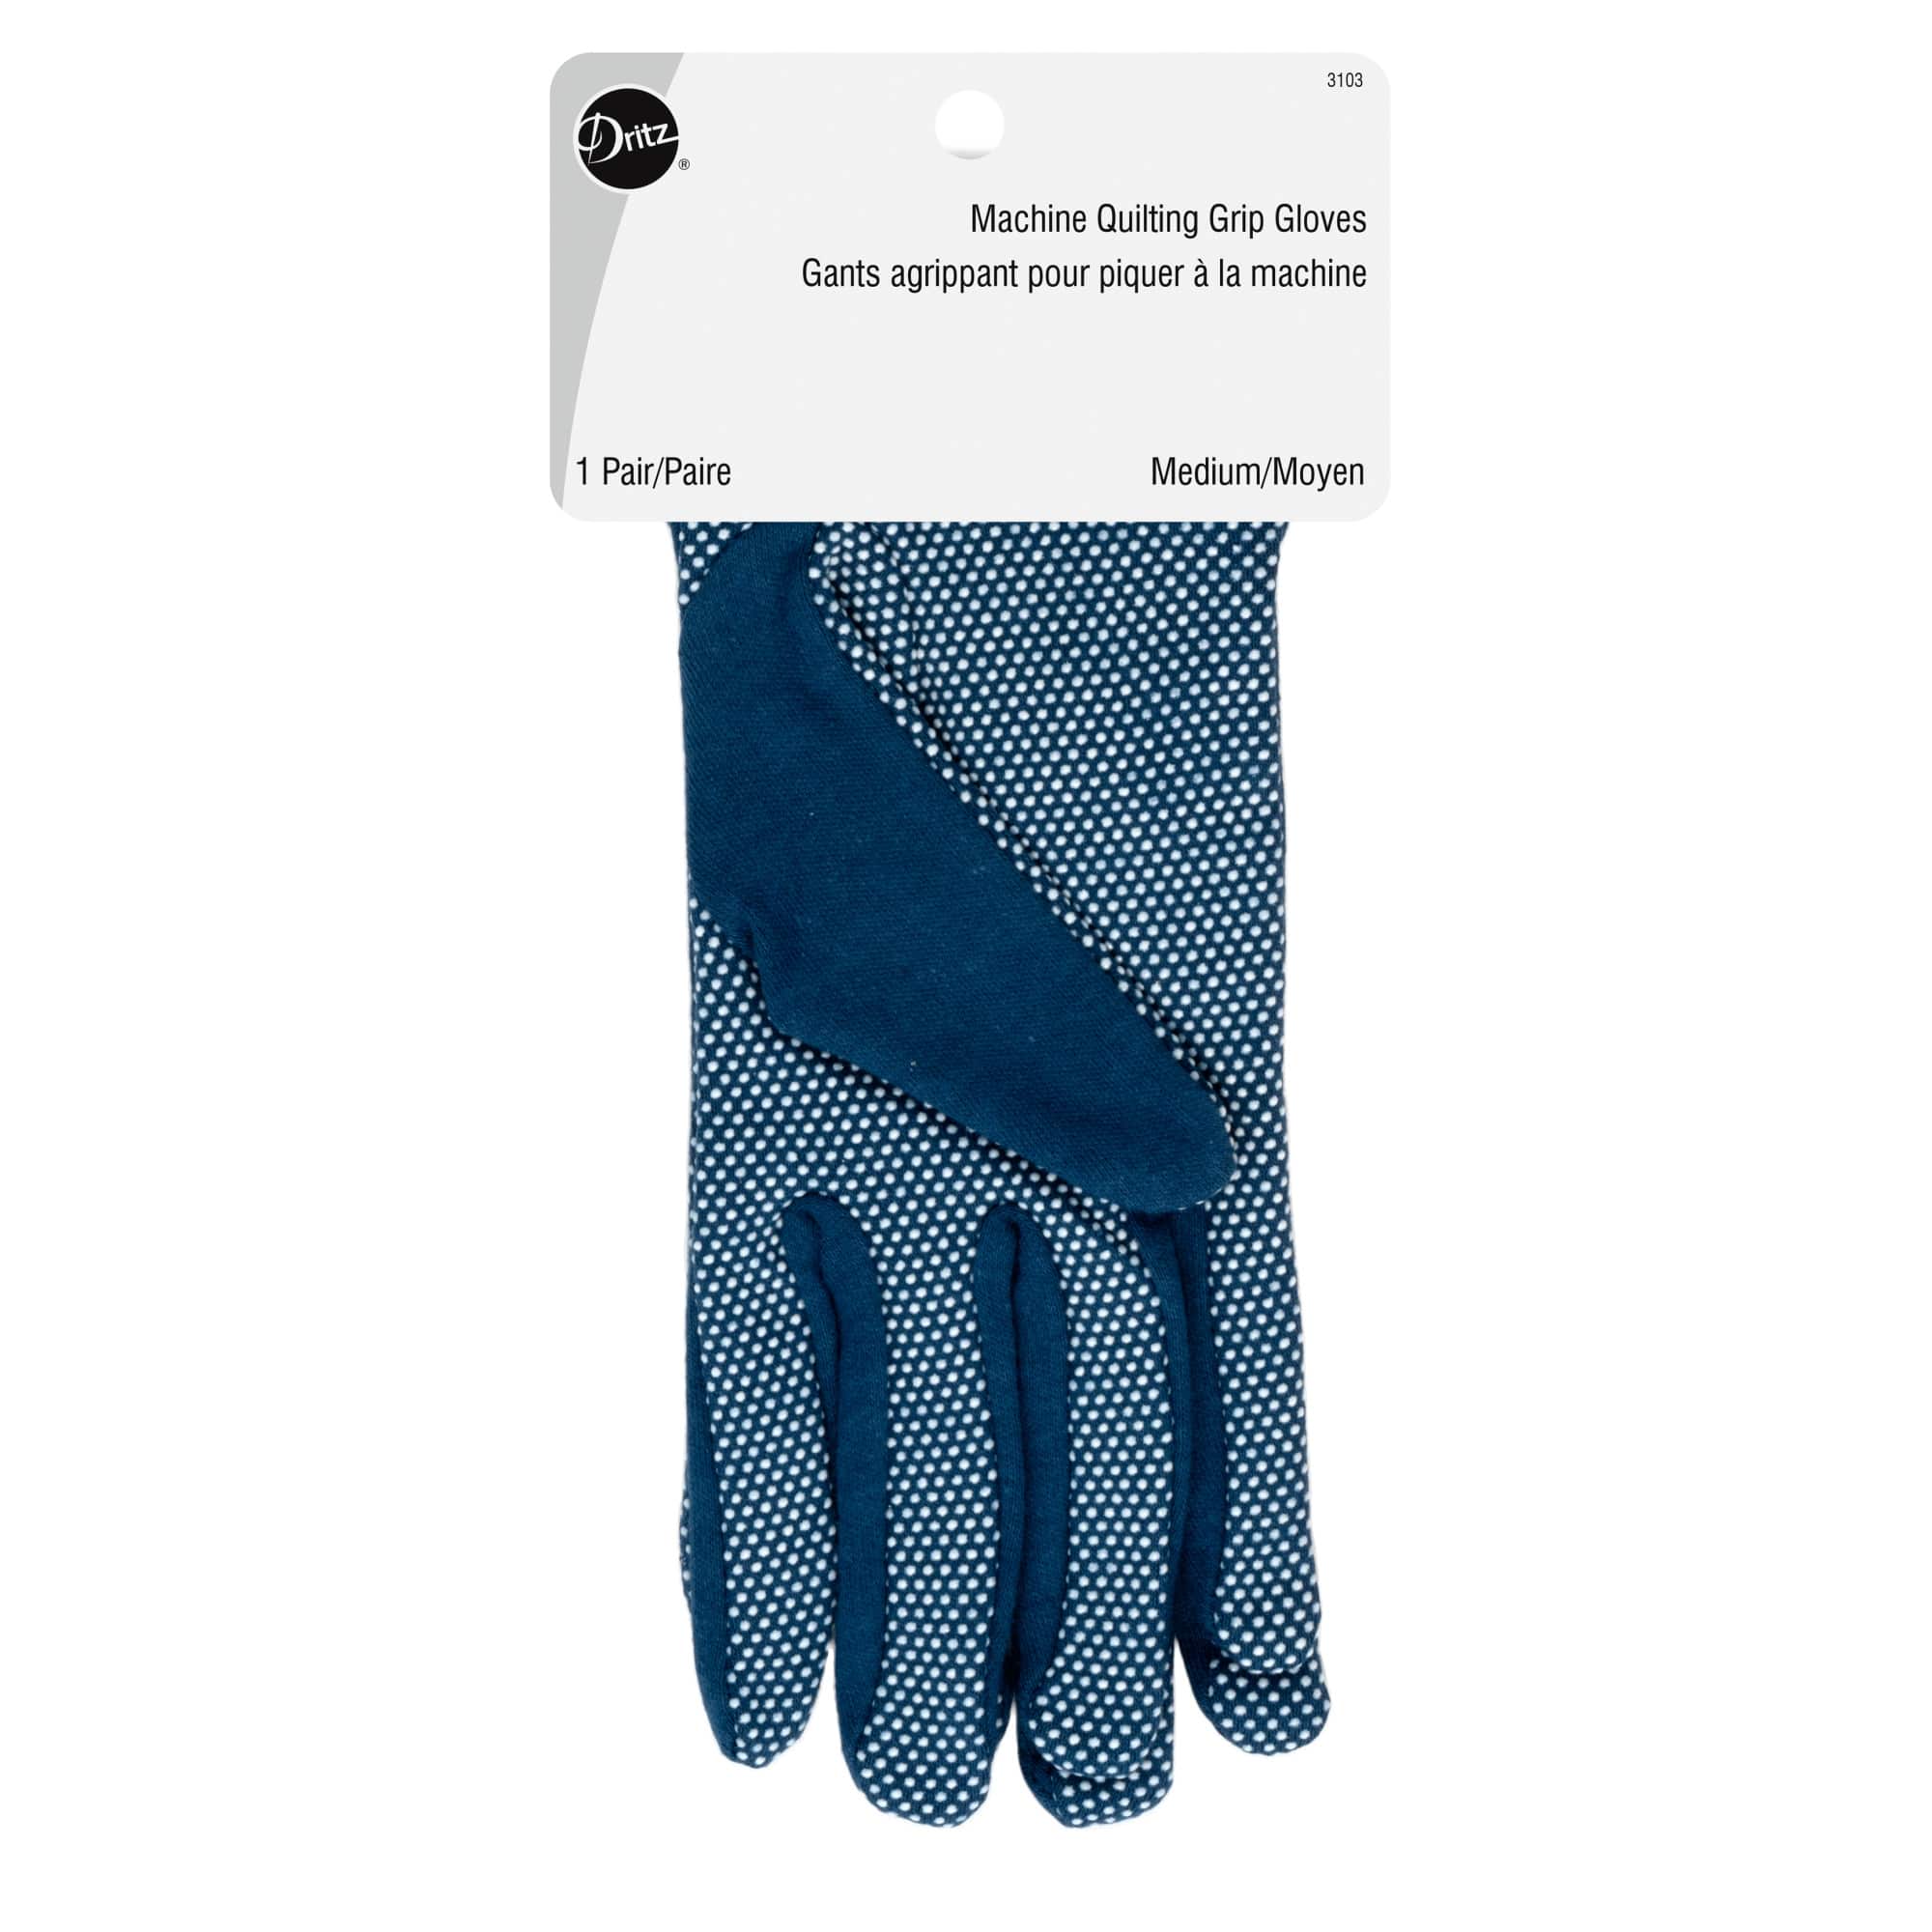 What are quilting gloves? 